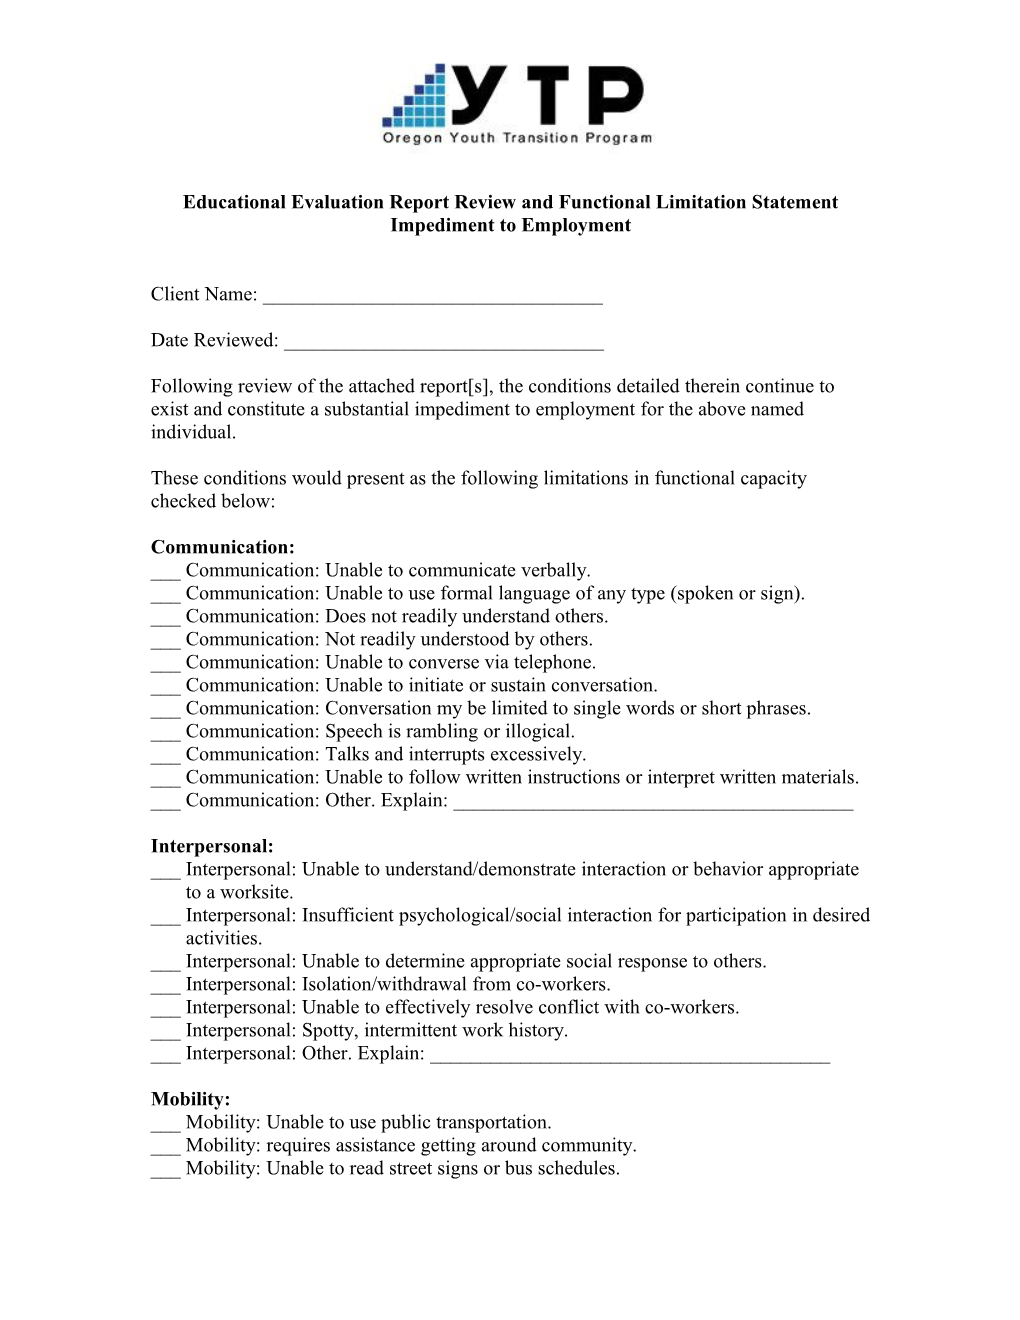 Educational Evaluation Report Review and Functional Limitation Statement